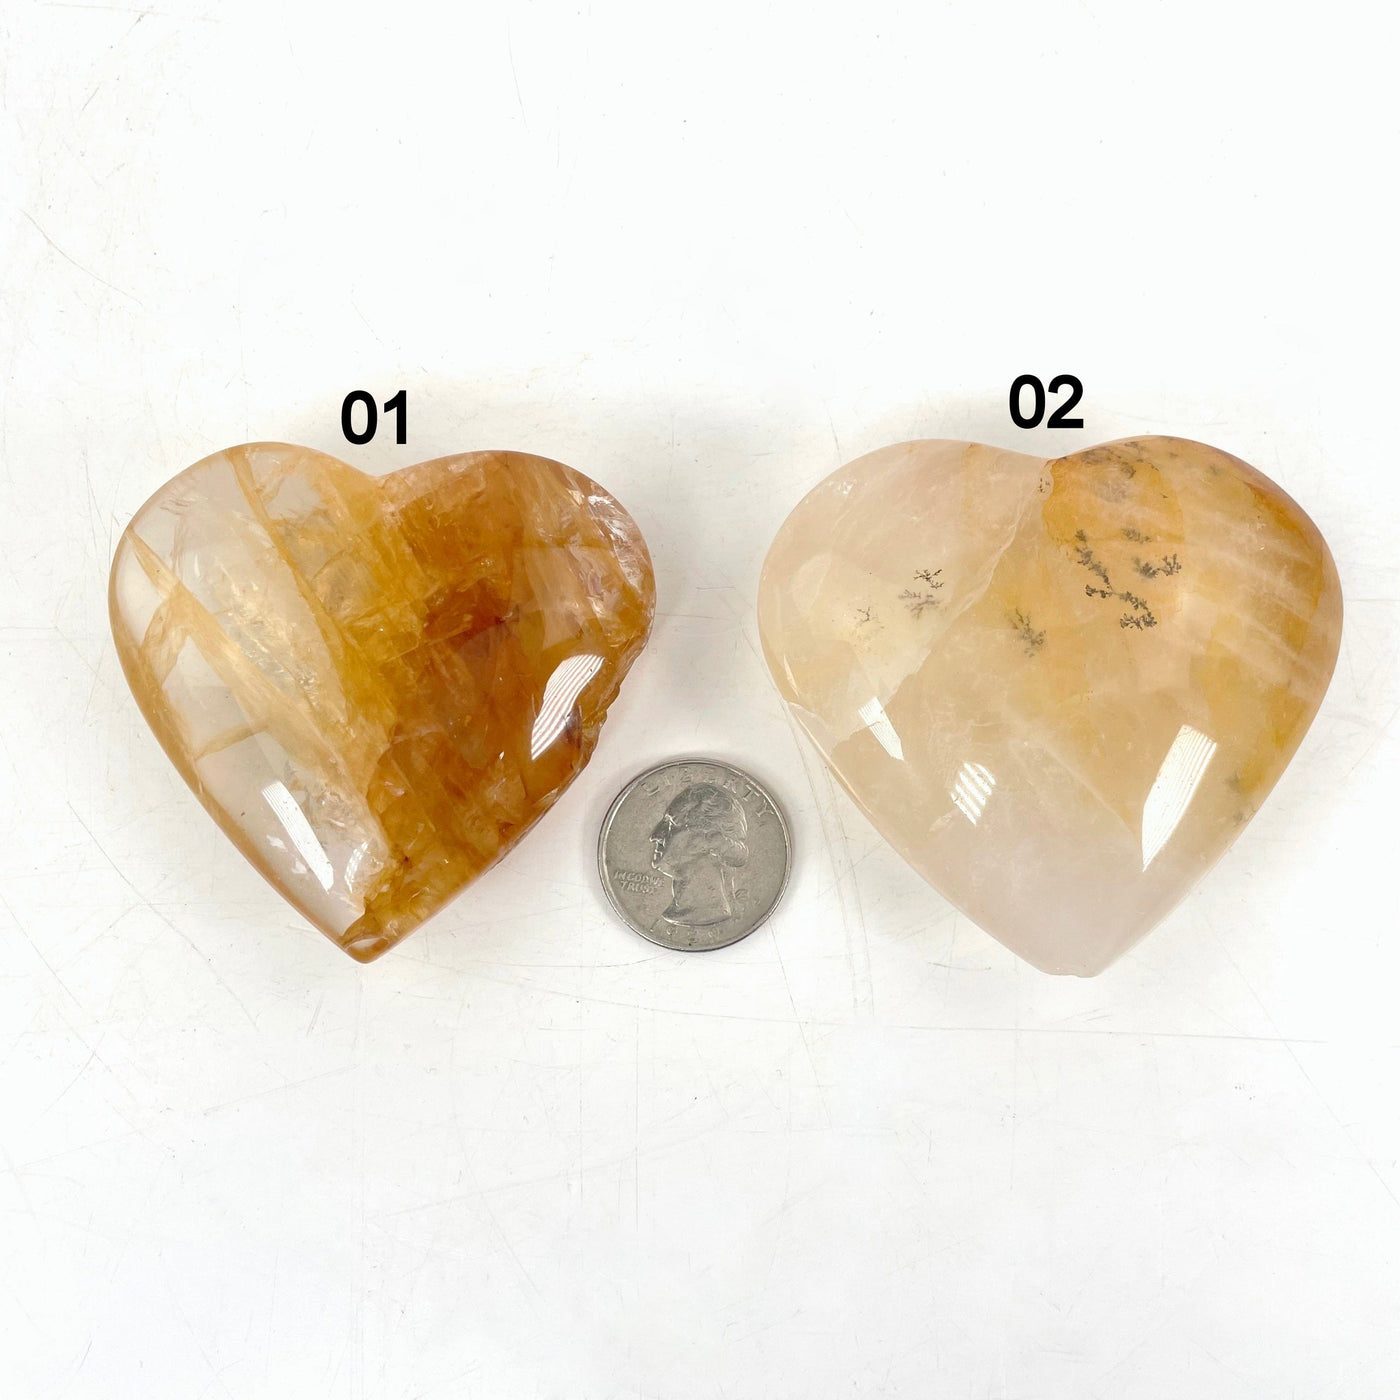 both golden healer polished heart options laying flat with quarter for size reference